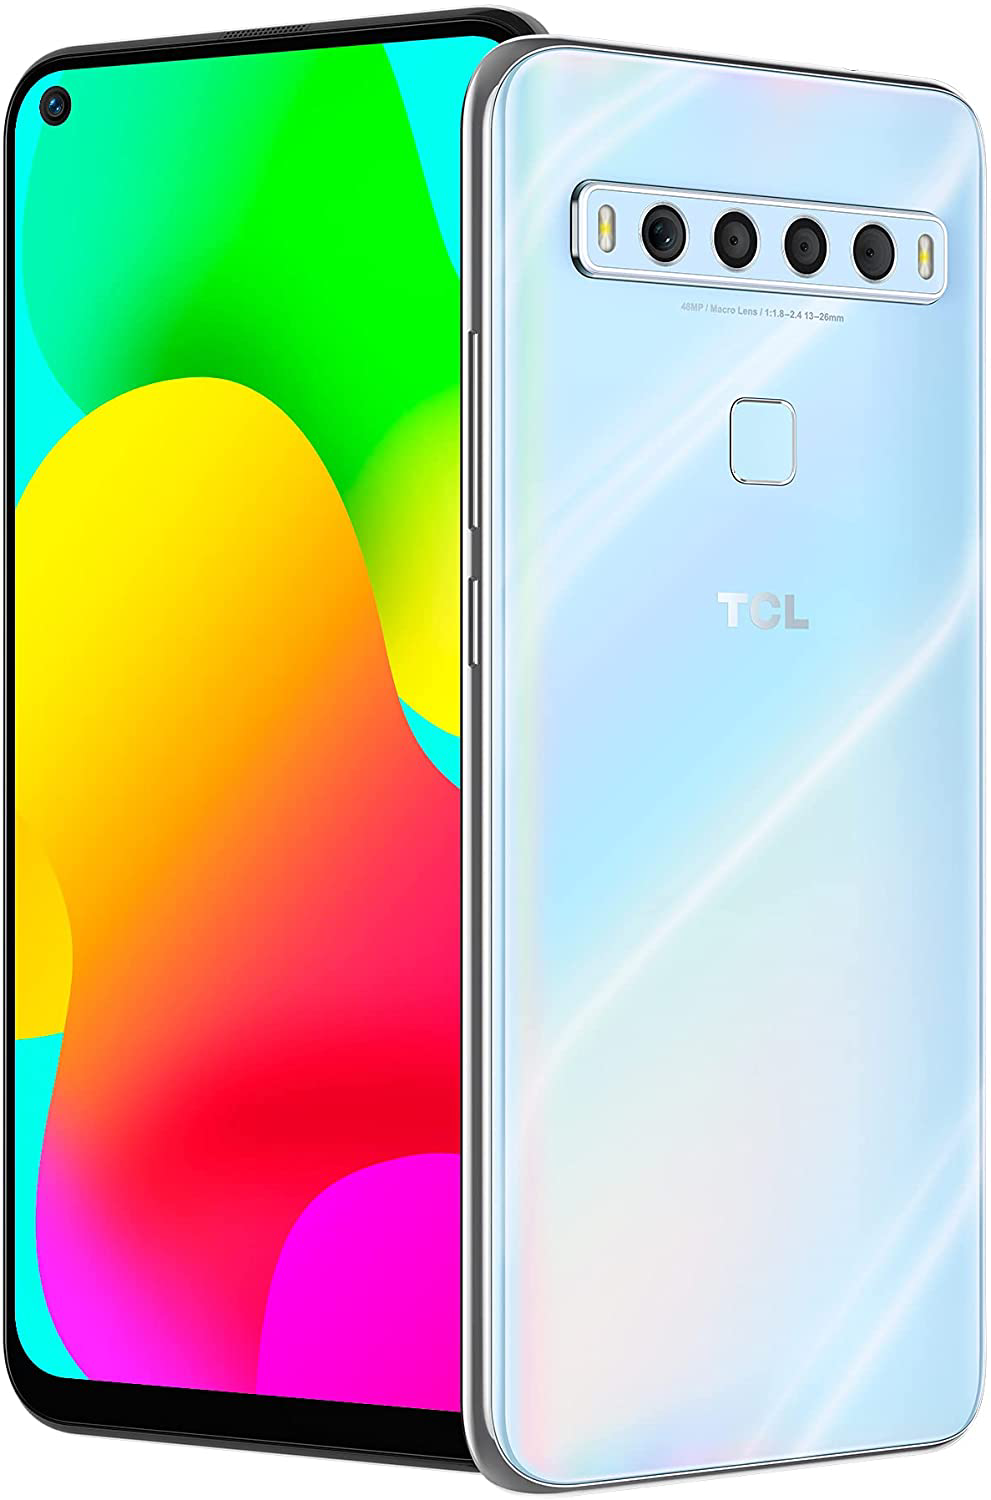 TCL 10L, Unlocked Android Cell Phone - $194 64GB+6GB RAM, 4000mAh Battery